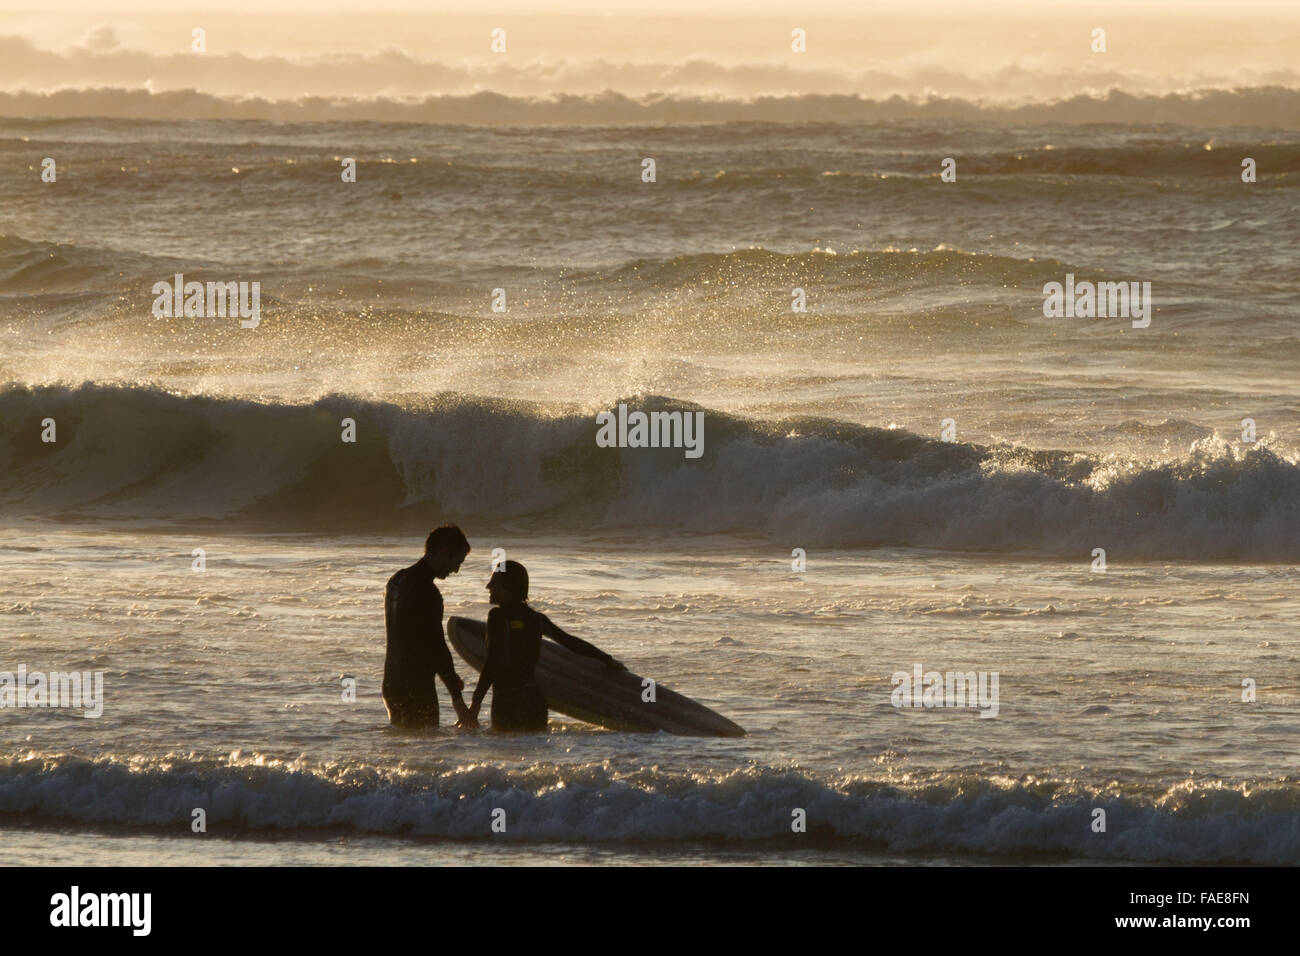 Surfer couple at sunset with waves breaking behind them. Stock Photo